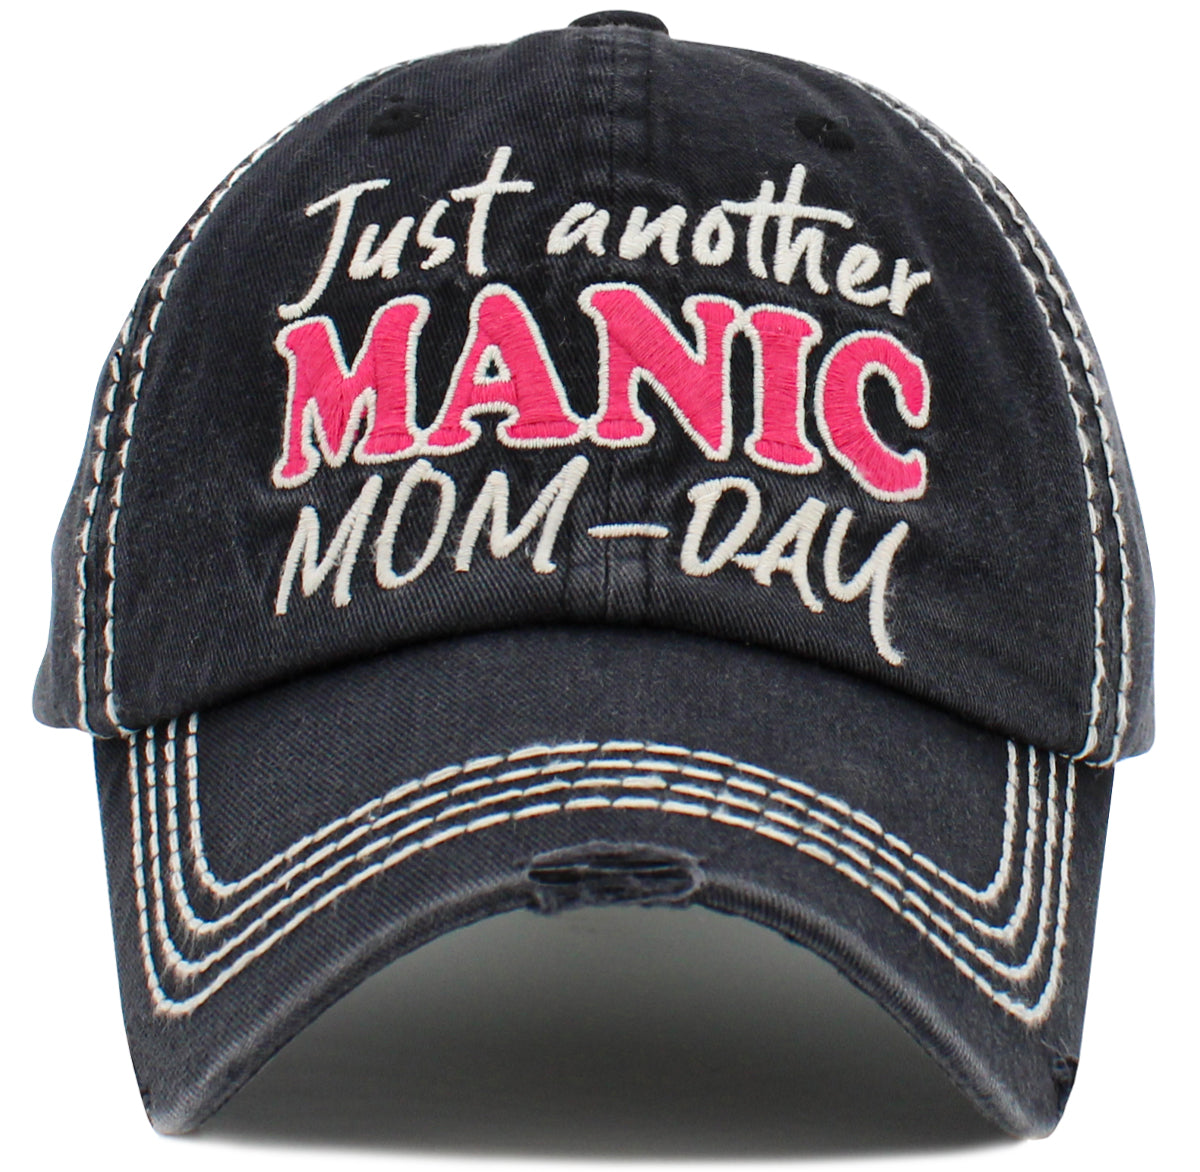 KBV1472 'Just another Manic Mom'  Washed Vintage Ballcap